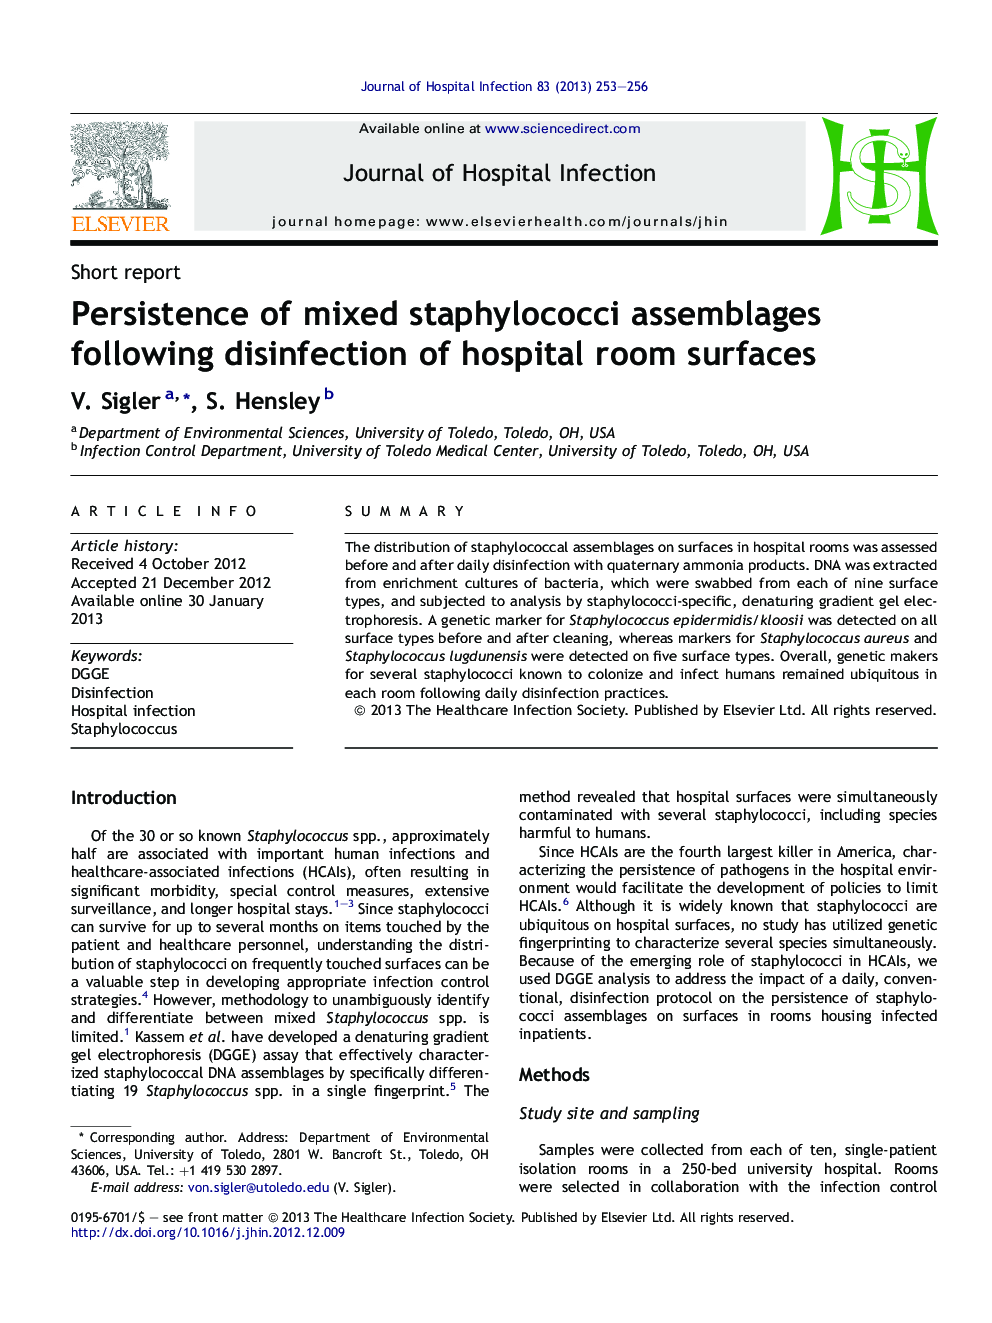 Persistence of mixed staphylococci assemblages following disinfection of hospital room surfaces